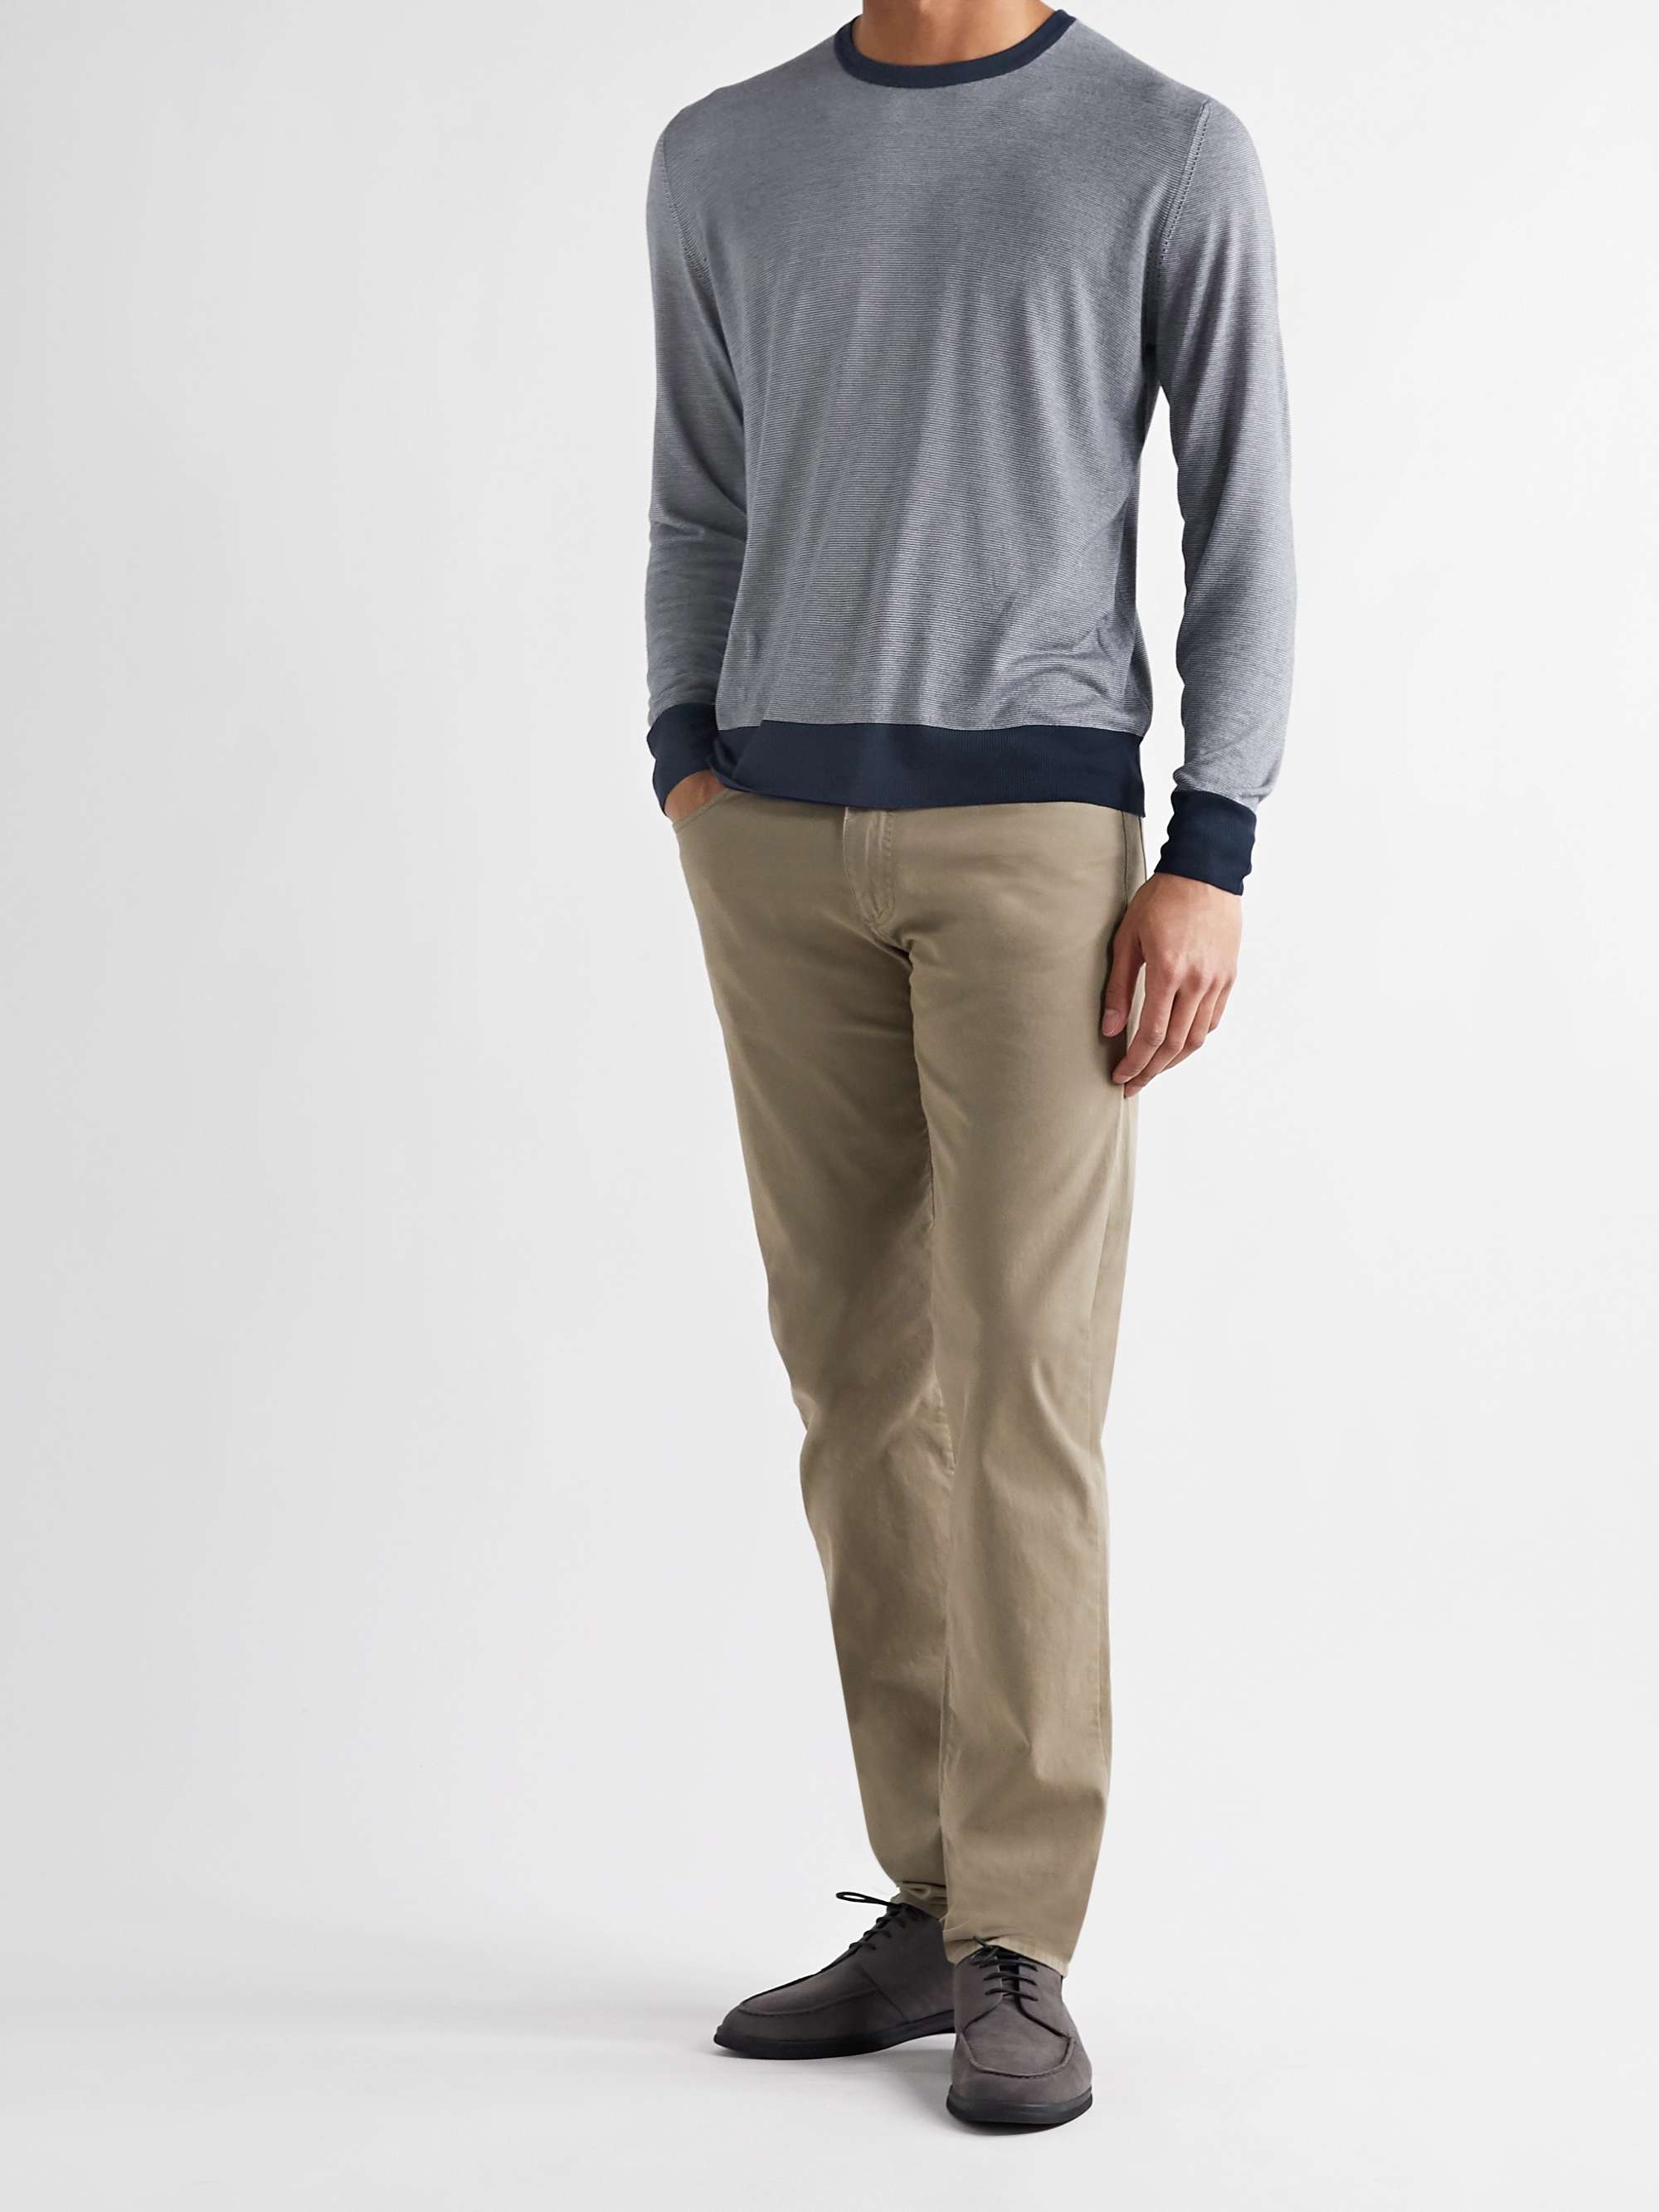 CANALI Slim-Fit Striped Knitted Sweater | MR PORTER